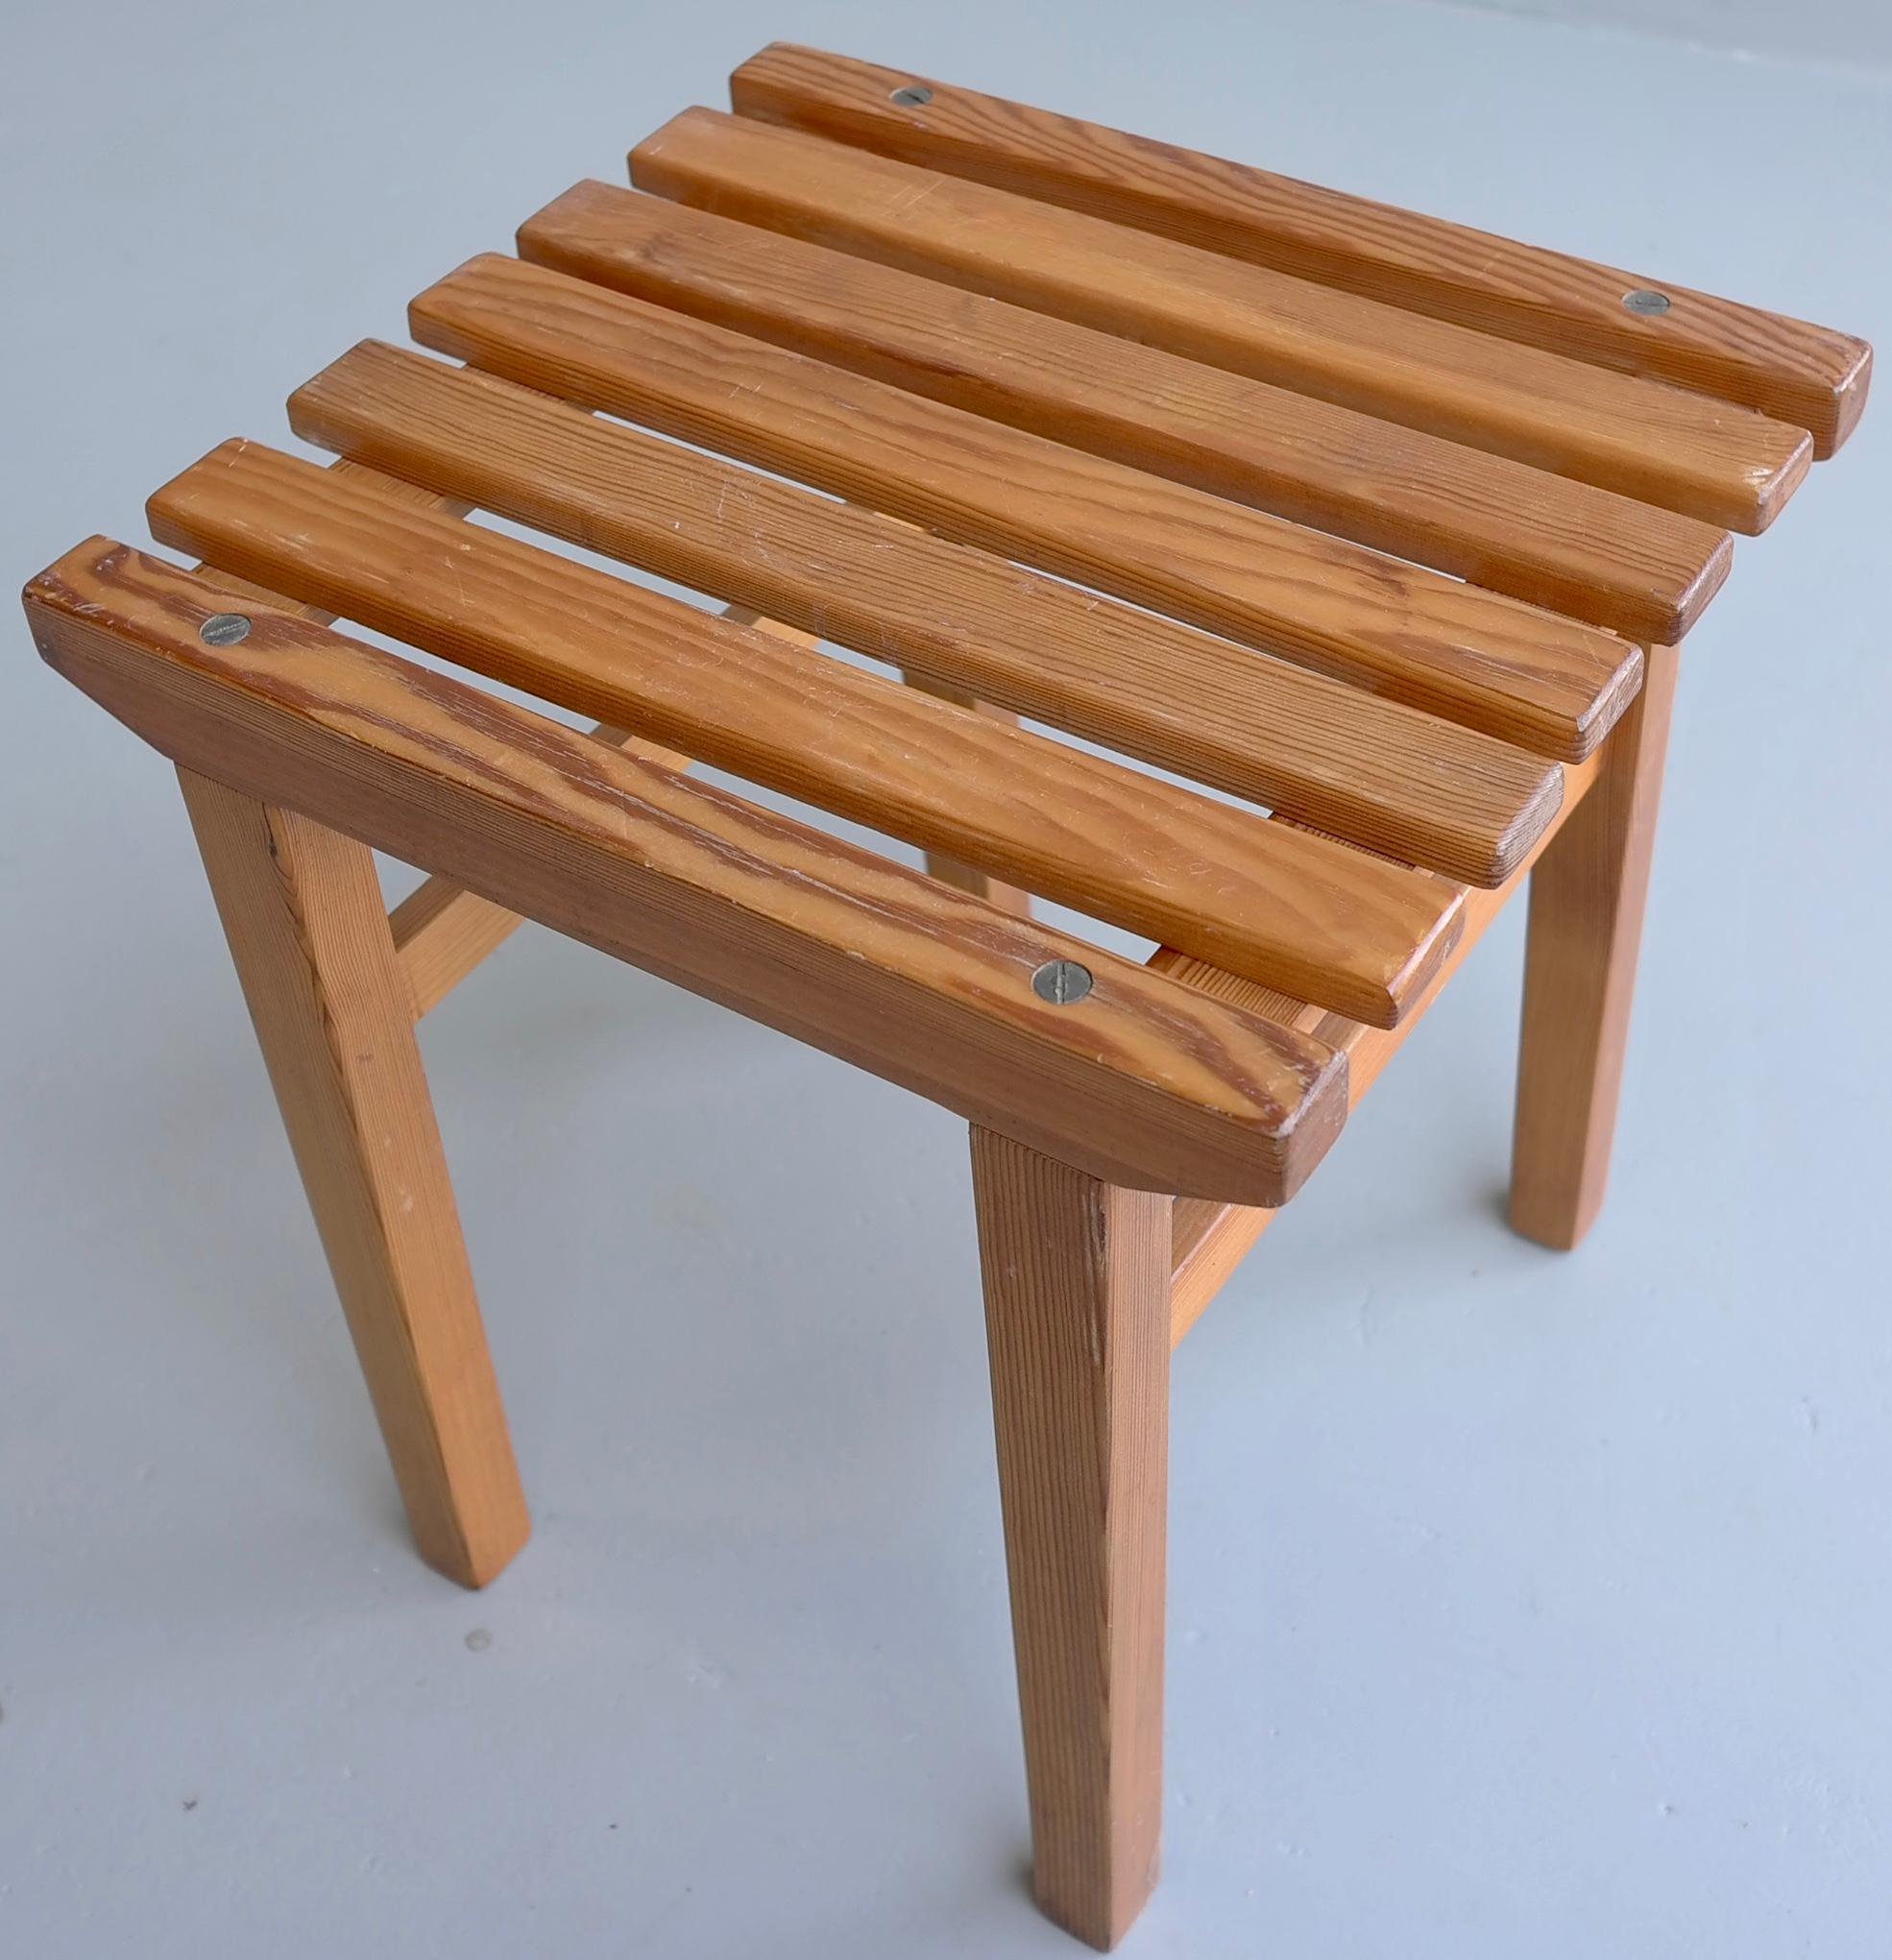 Solid pine midcentury slats stool, Sweden, 1960s.
Nice detail: finished with 4 large brass screws. Can also be used as a side table.